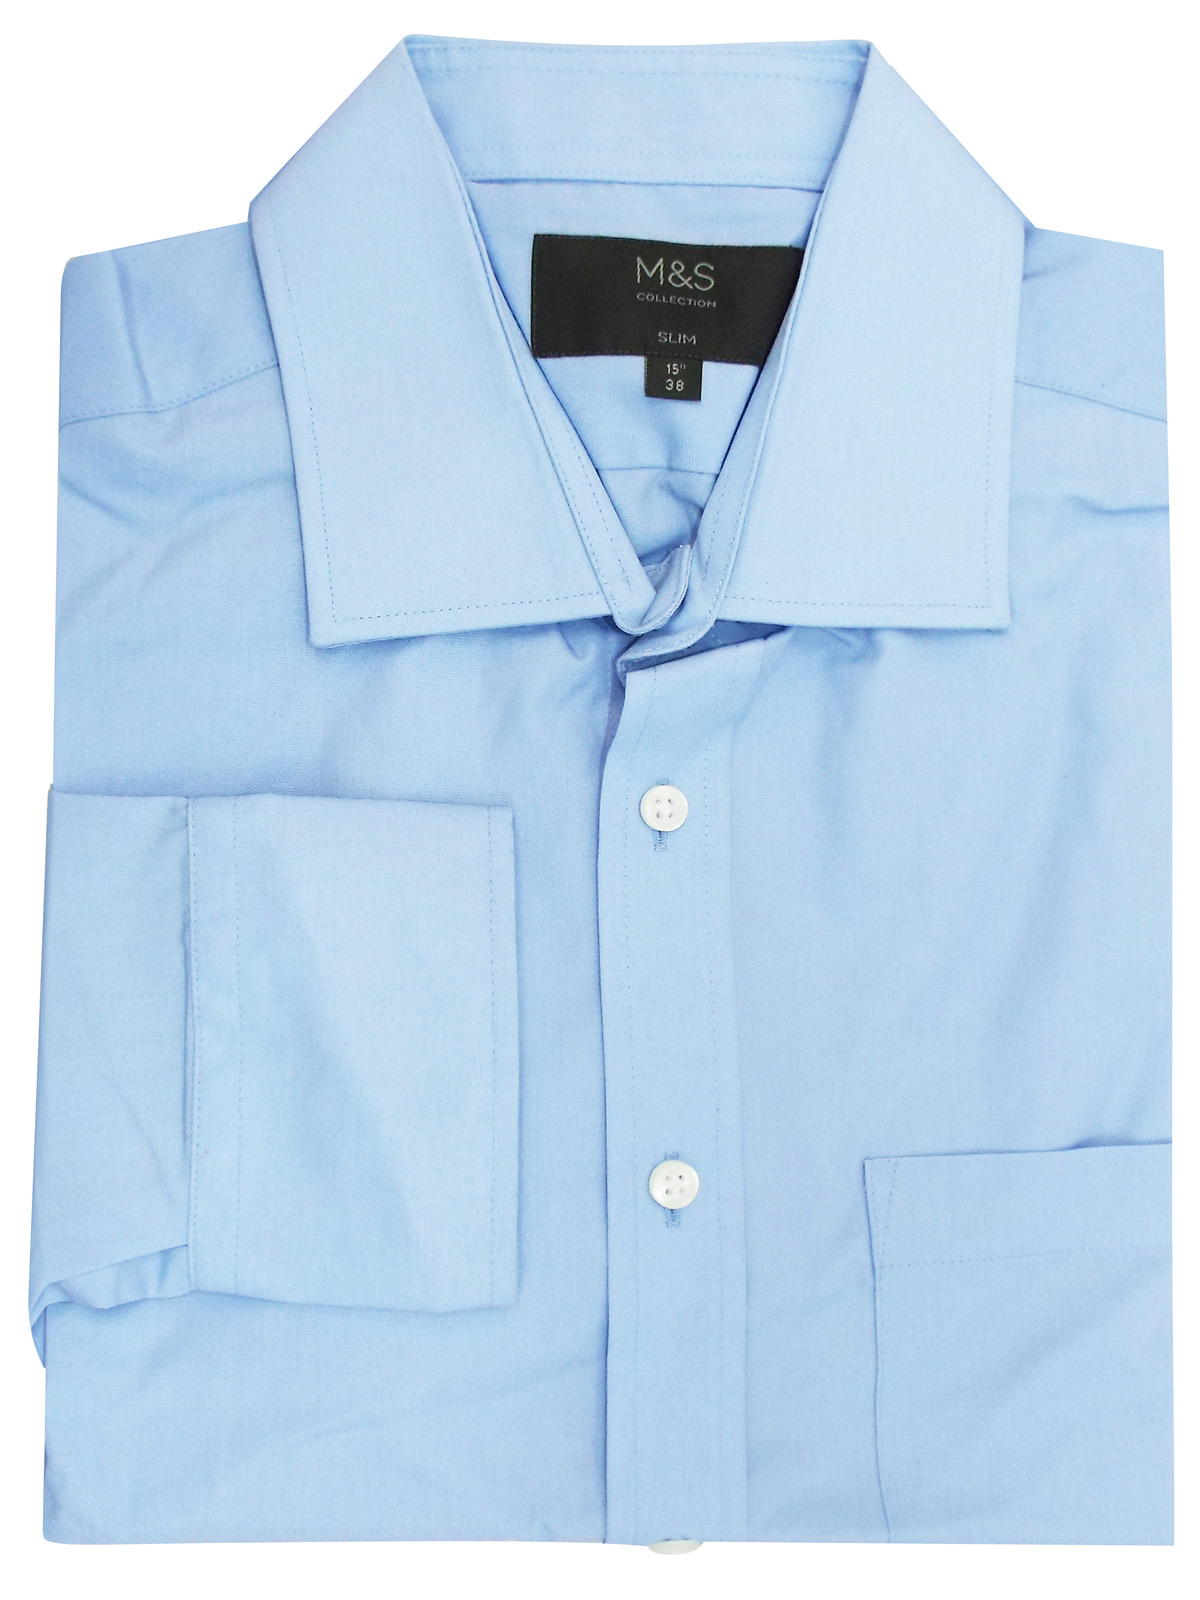 Marks and Spencer - - M&5 SKY-BLUE Mens Pure Cotton Slim Fit Shirt with ...